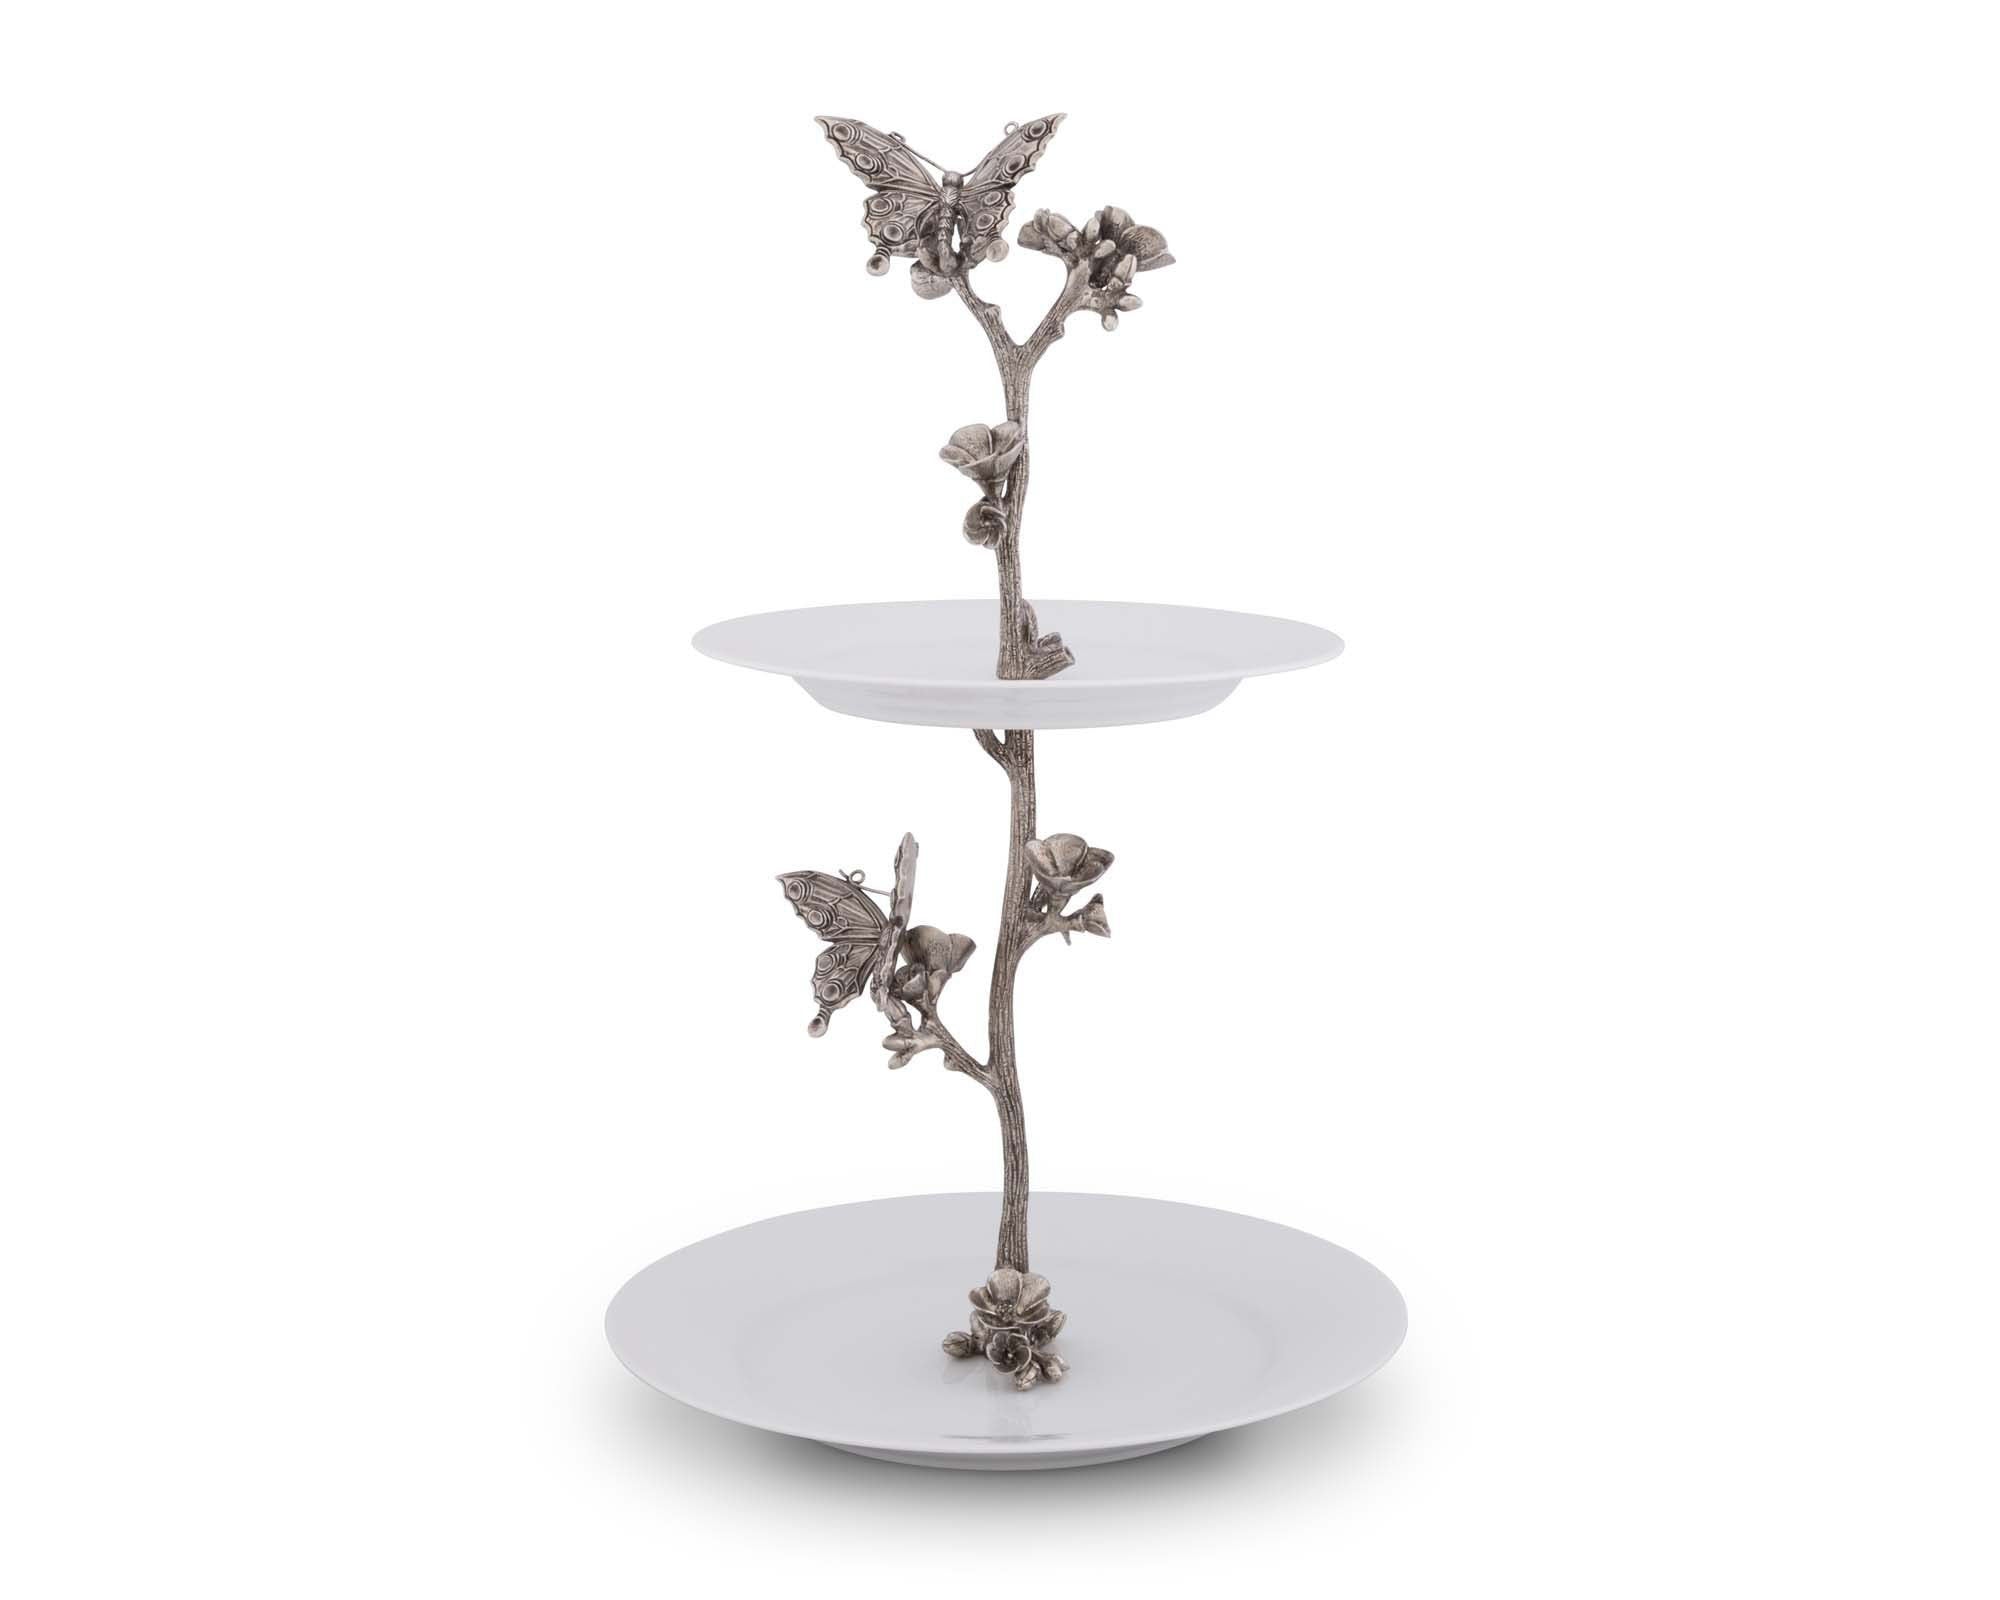 Vagabond House Butterfly Dessert Stand Product Image